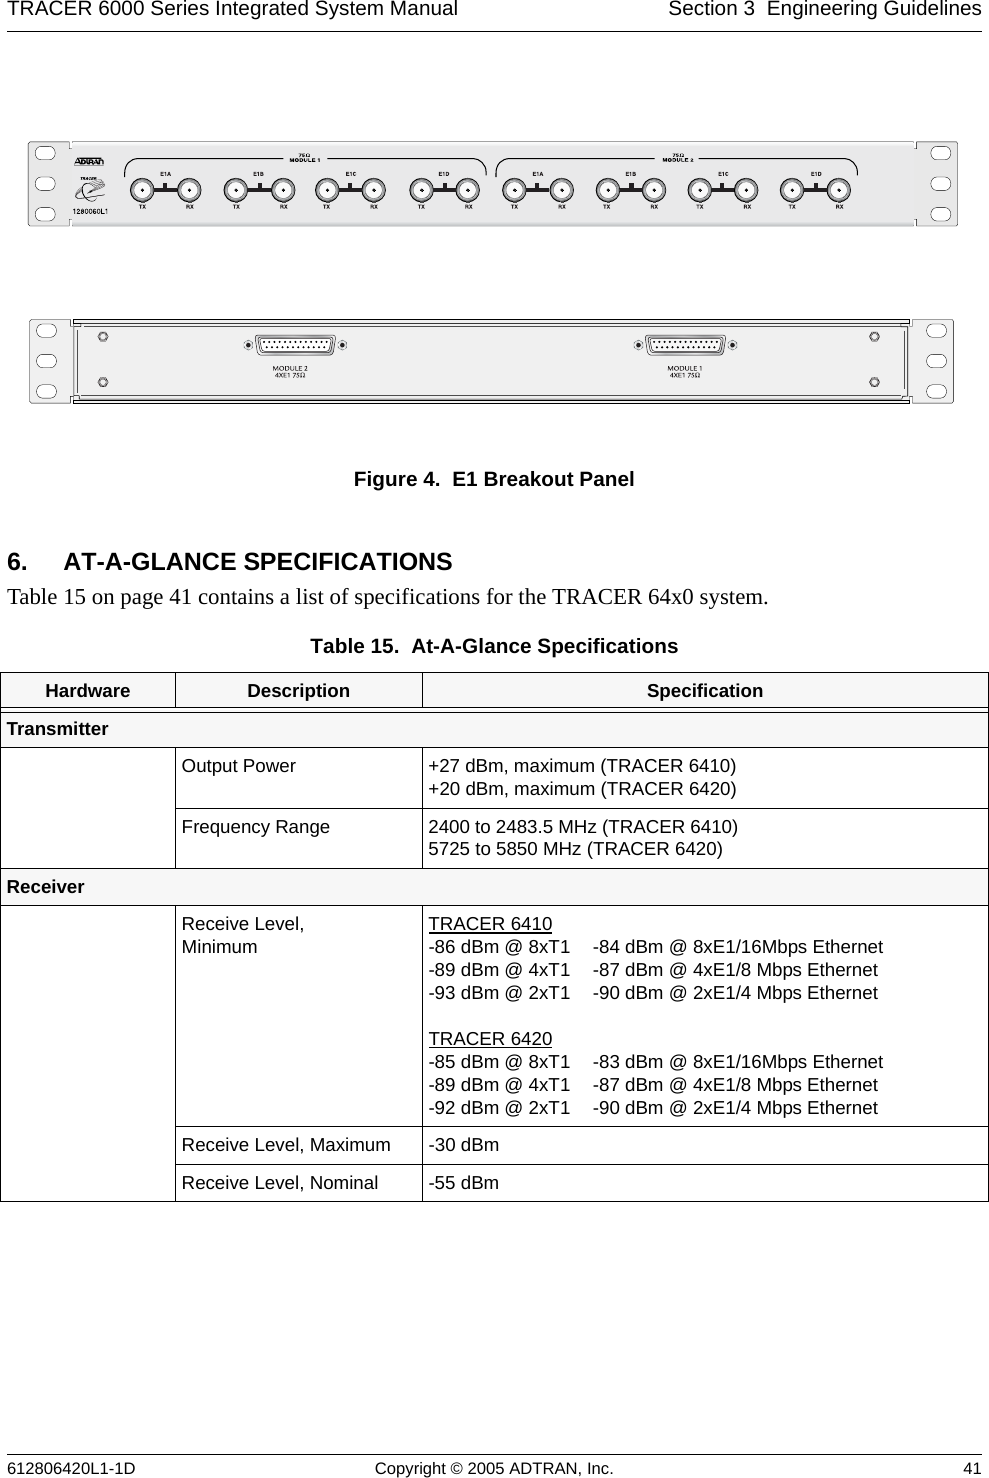 TRACER 6000 Series Integrated System Manual Section 3  Engineering Guidelines612806420L1-1D Copyright © 2005 ADTRAN, Inc. 41Figure 4.  E1 Breakout Panel6. AT-A-GLANCE SPECIFICATIONSTable 15 on page 41 contains a list of specifications for the TRACER 64x0 system.Table 15.  At-A-Glance Specifications  Hardware Description SpecificationTransmitterOutput Power +27 dBm, maximum (TRACER 6410)+20 dBm, maximum (TRACER 6420)Frequency Range 2400 to 2483.5 MHz (TRACER 6410)5725 to 5850 MHz (TRACER 6420)ReceiverReceive Level, MinimumTRACER 6410-86 dBm @ 8xT1 -89 dBm @ 4xT1-93 dBm @ 2xT1TRACER 6420-85 dBm @ 8xT1 -89 dBm @ 4xT1-92 dBm @ 2xT1-84 dBm @ 8xE1/16Mbps Ethernet-87 dBm @ 4xE1/8 Mbps Ethernet-90 dBm @ 2xE1/4 Mbps Ethernet-83 dBm @ 8xE1/16Mbps Ethernet-87 dBm @ 4xE1/8 Mbps Ethernet-90 dBm @ 2xE1/4 Mbps EthernetReceive Level, Maximum -30 dBm Receive Level, Nominal -55 dBm 